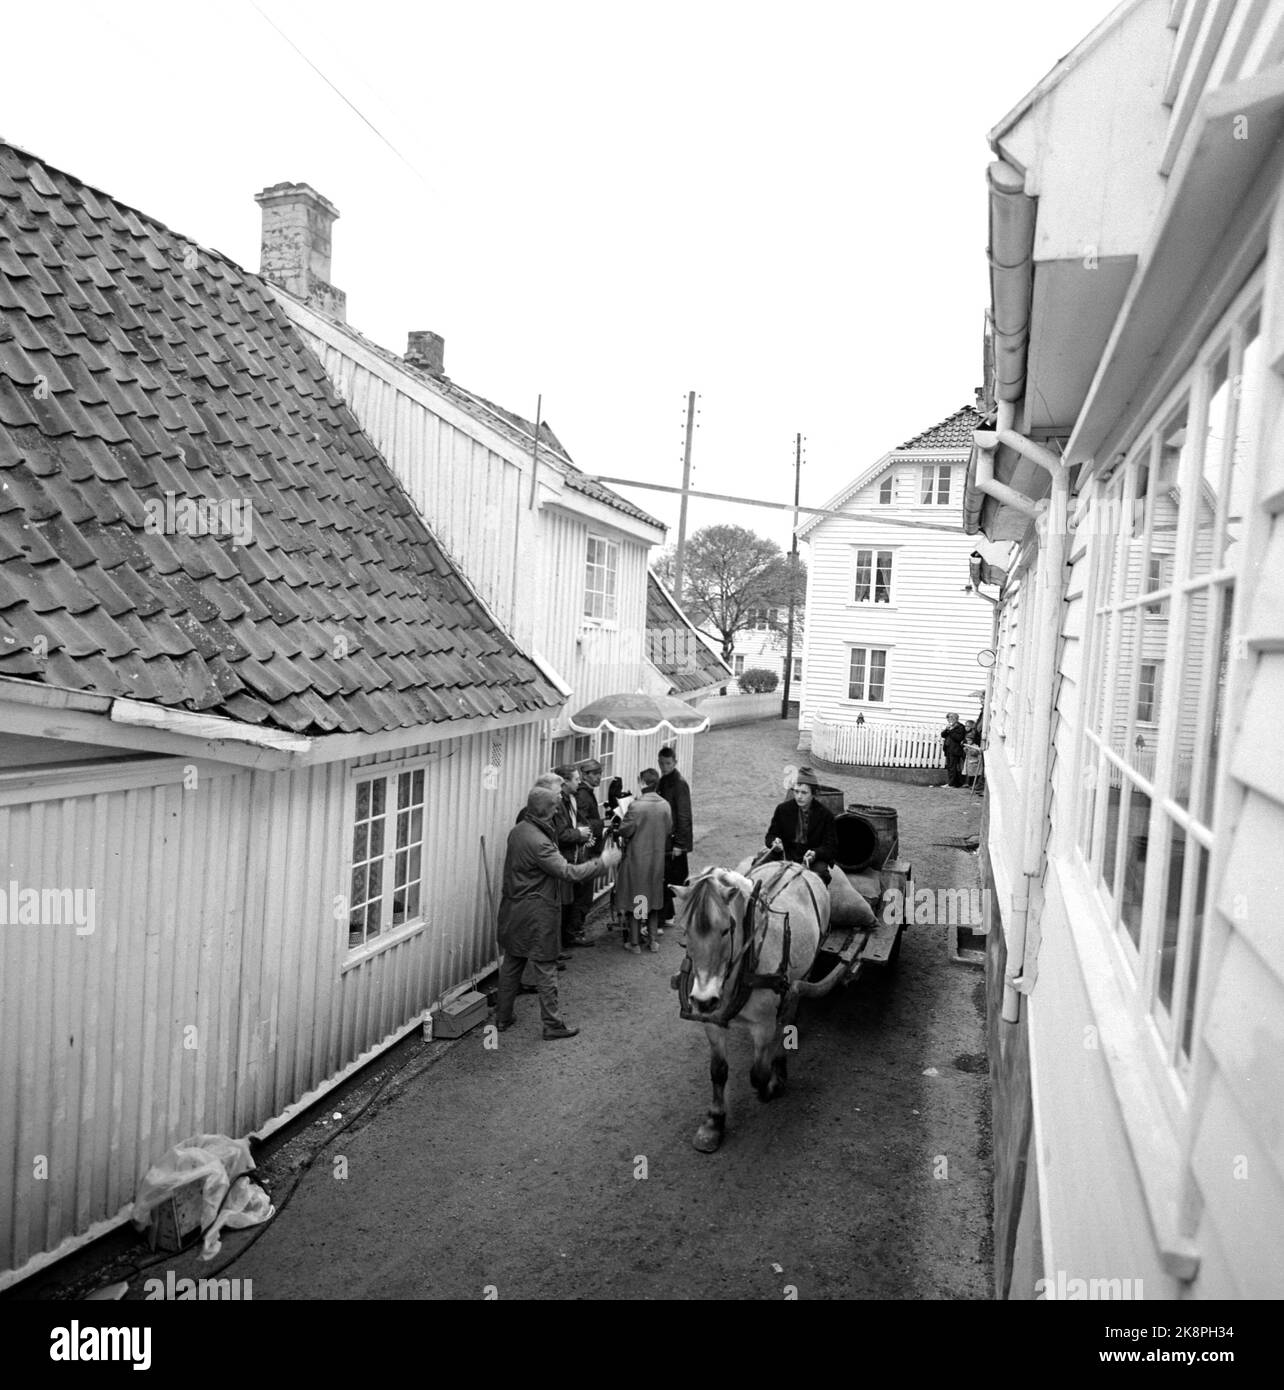 Skudeneshavn June 1967. The filming of 'Skipper Worse' was filmed in 'Søragadå' in Skudeneshavn, which has old farm houses and seahouses from the 18th century that is just as untouched to this day. The television theater will broadcast five hours of film about skipper Worse. Here we see horses with carts loaded with barrels drive through the narrow streets. Photo: Sverre A. Børretzen / Current / NTB Stock Photo